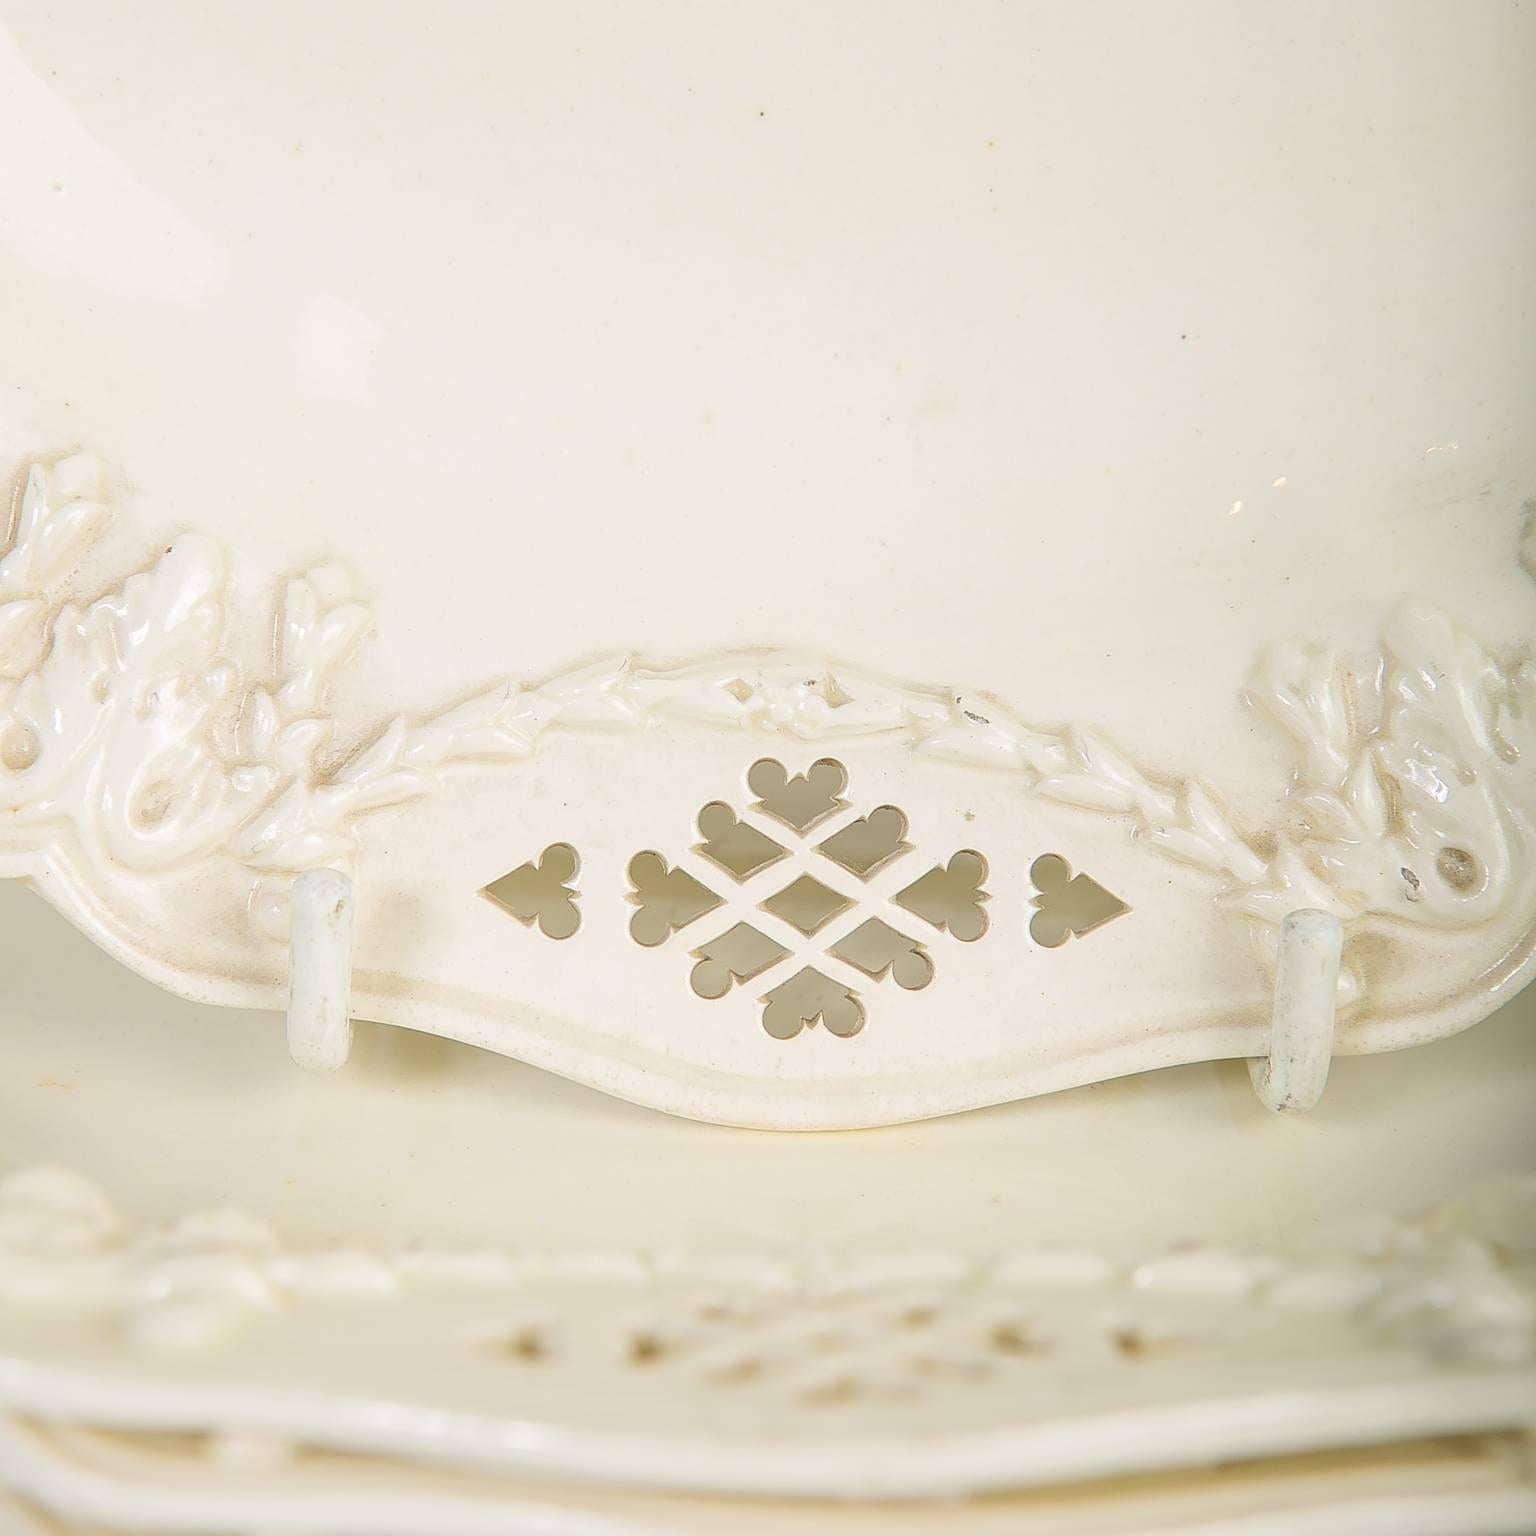 Neoclassical Pierced Creamware Dishes 18th Century, a Set of Six